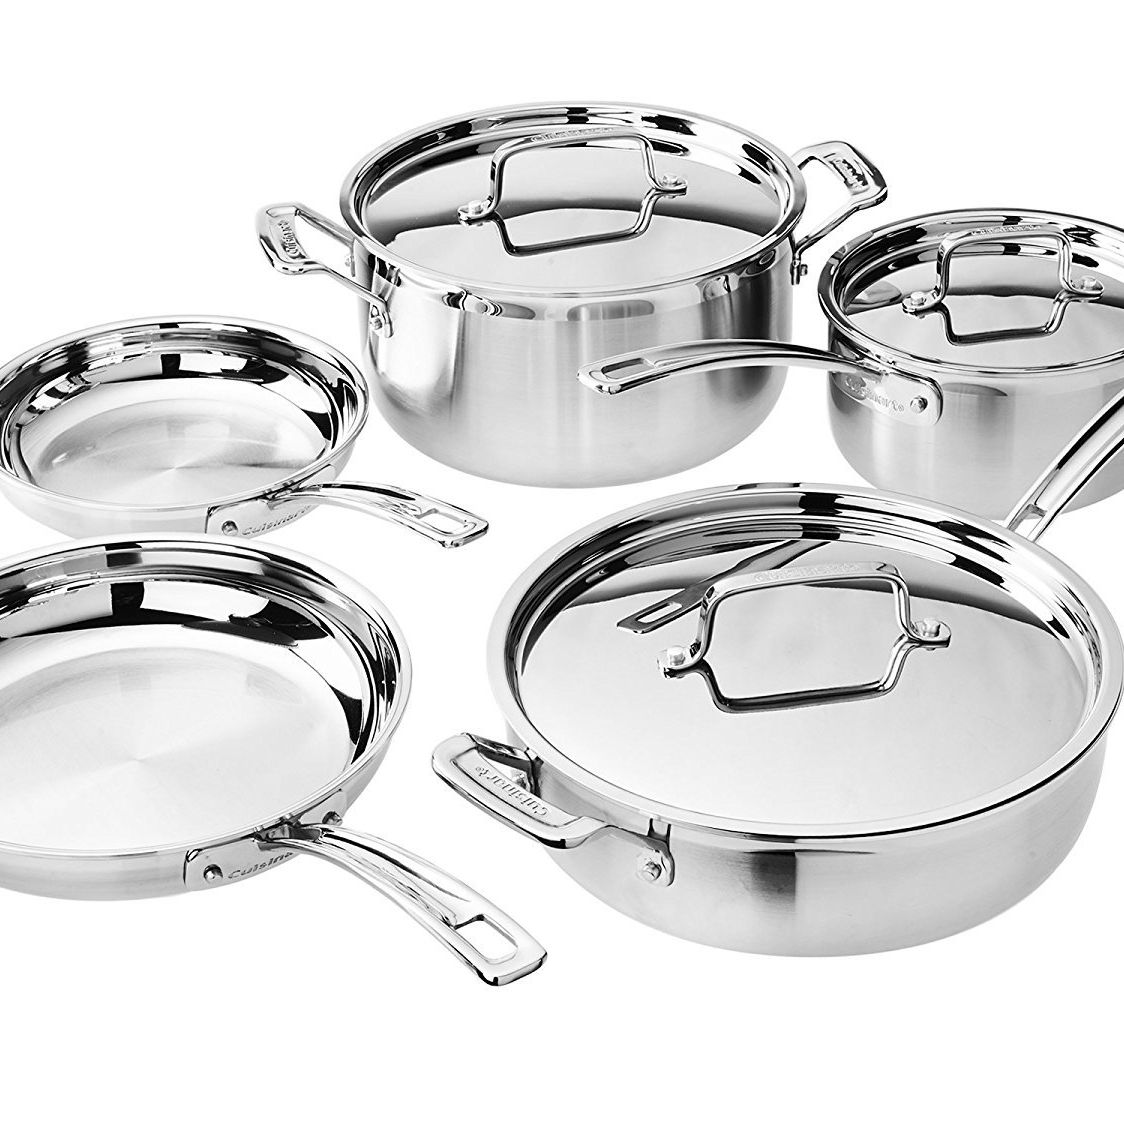 https://hips.hearstapps.com/hmg-prod/images/281/stainless-steel-cookware-1503145961.jpg?crop=0.75xw:1xh;center,top&resize=1200:*